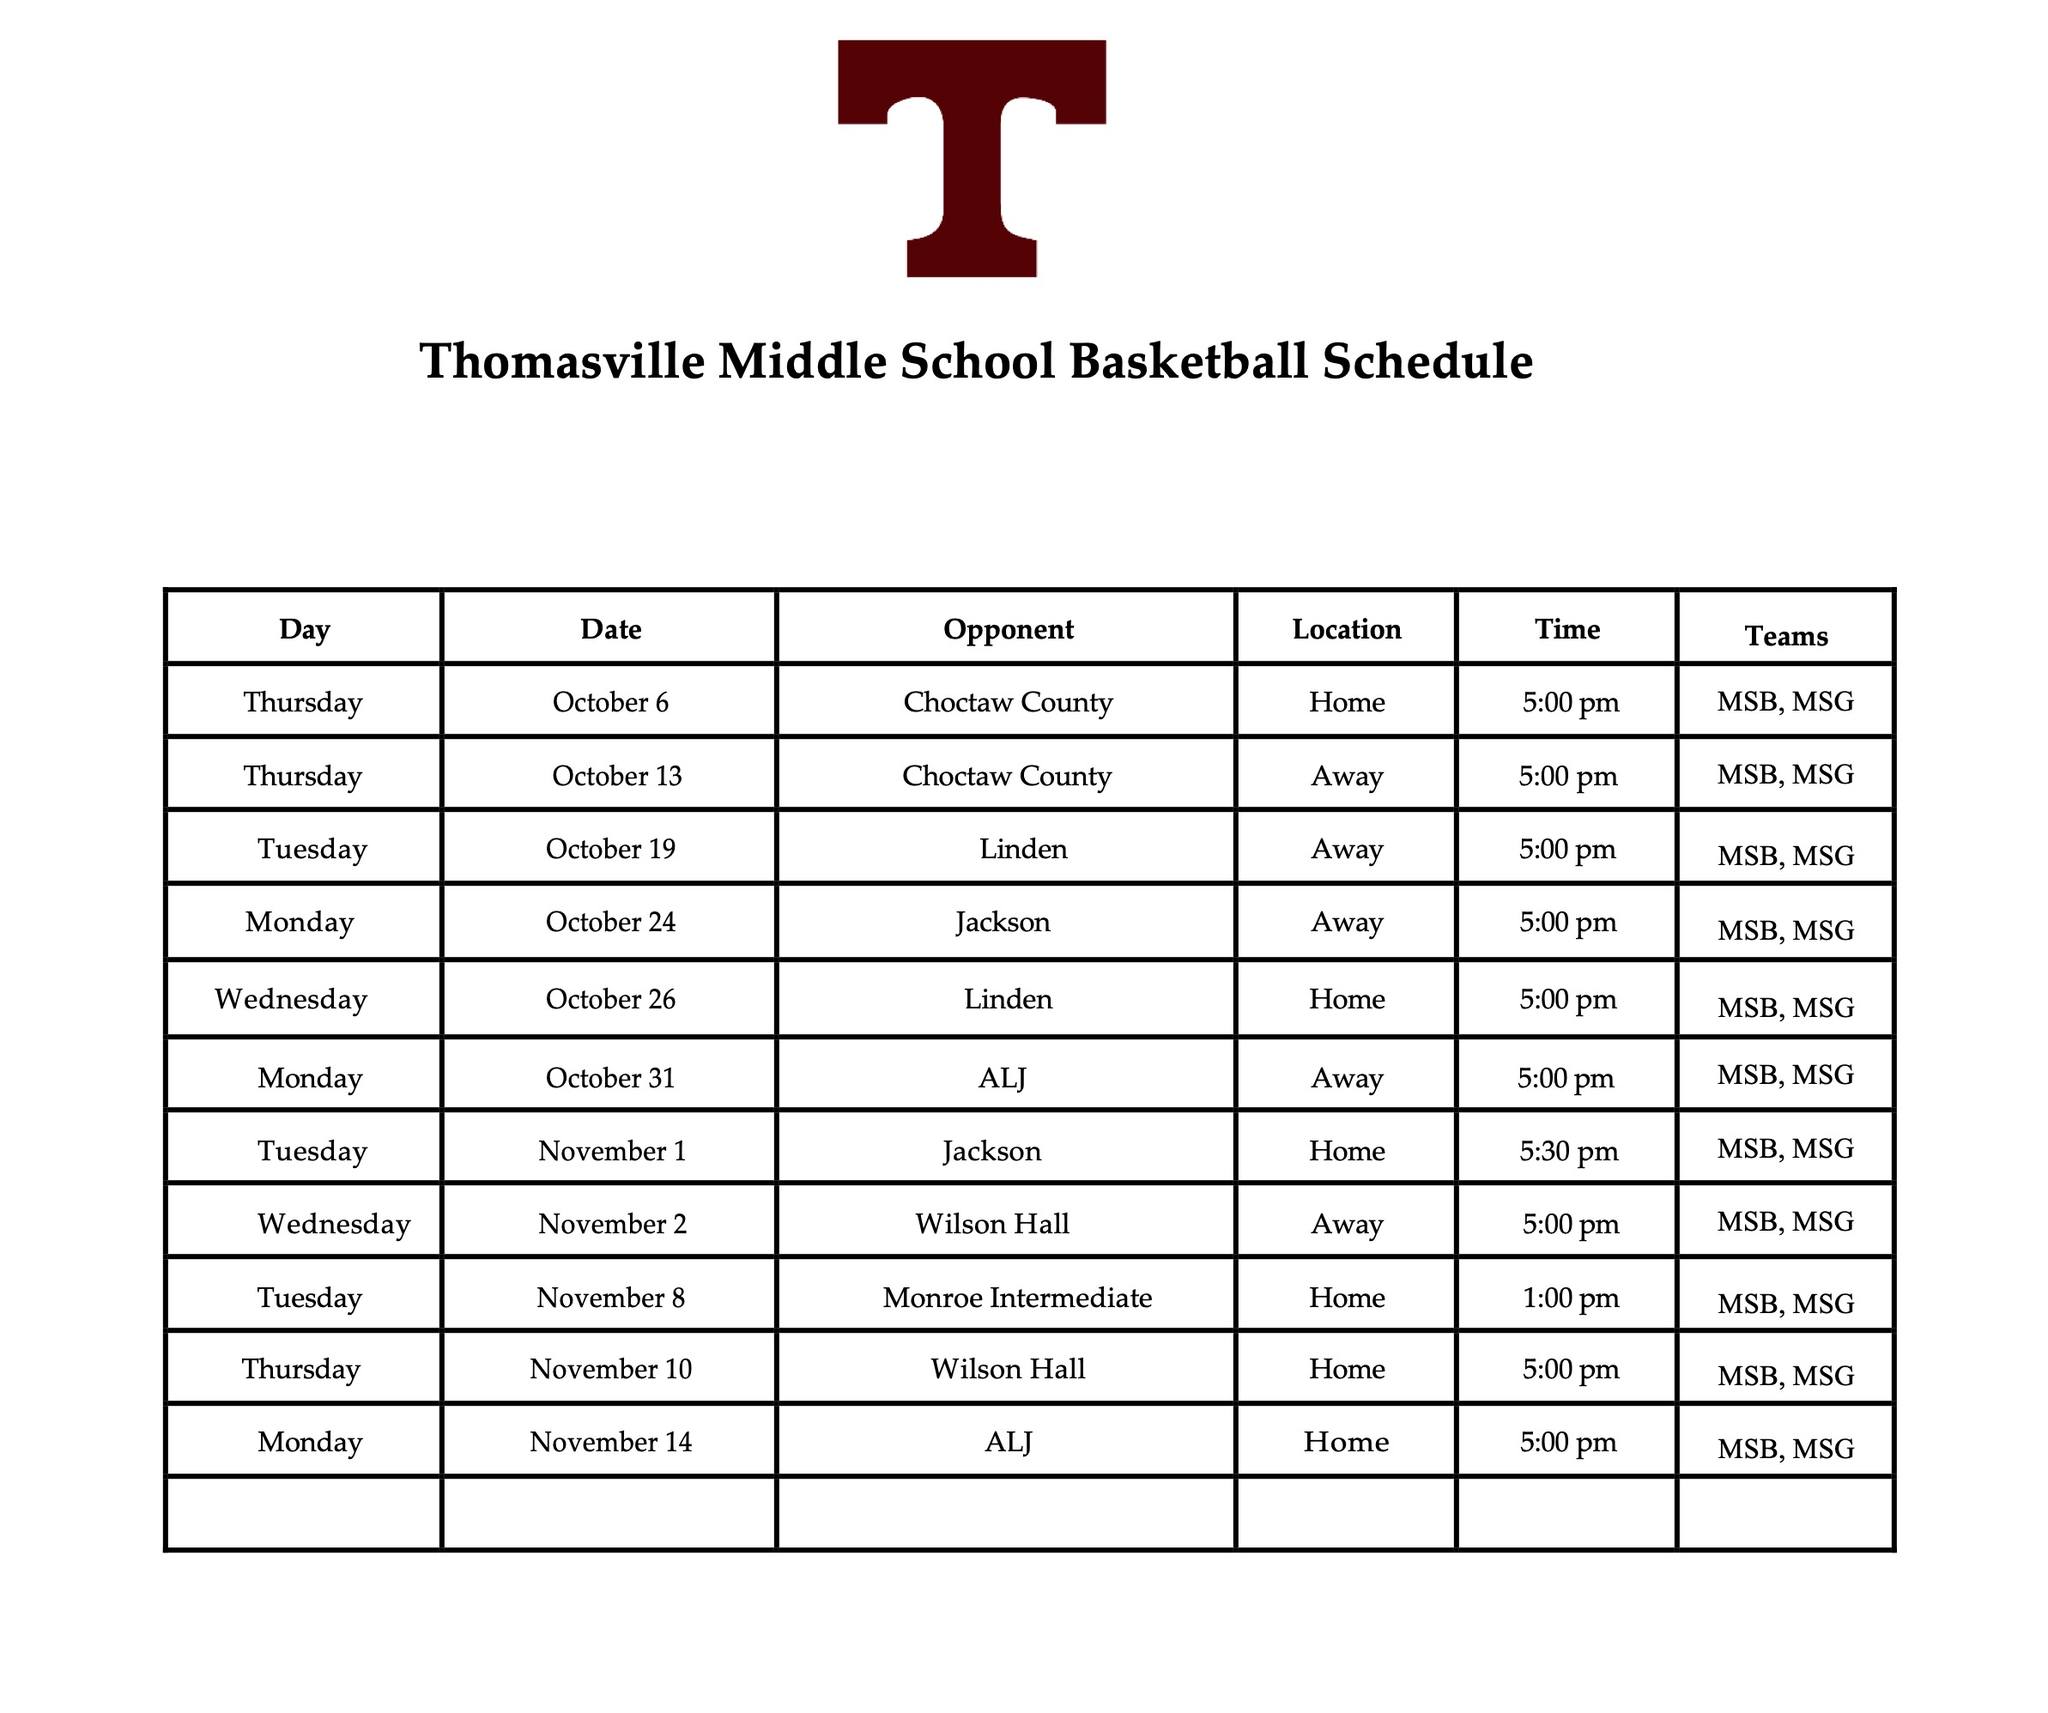 TMS basketball schedule 22-23